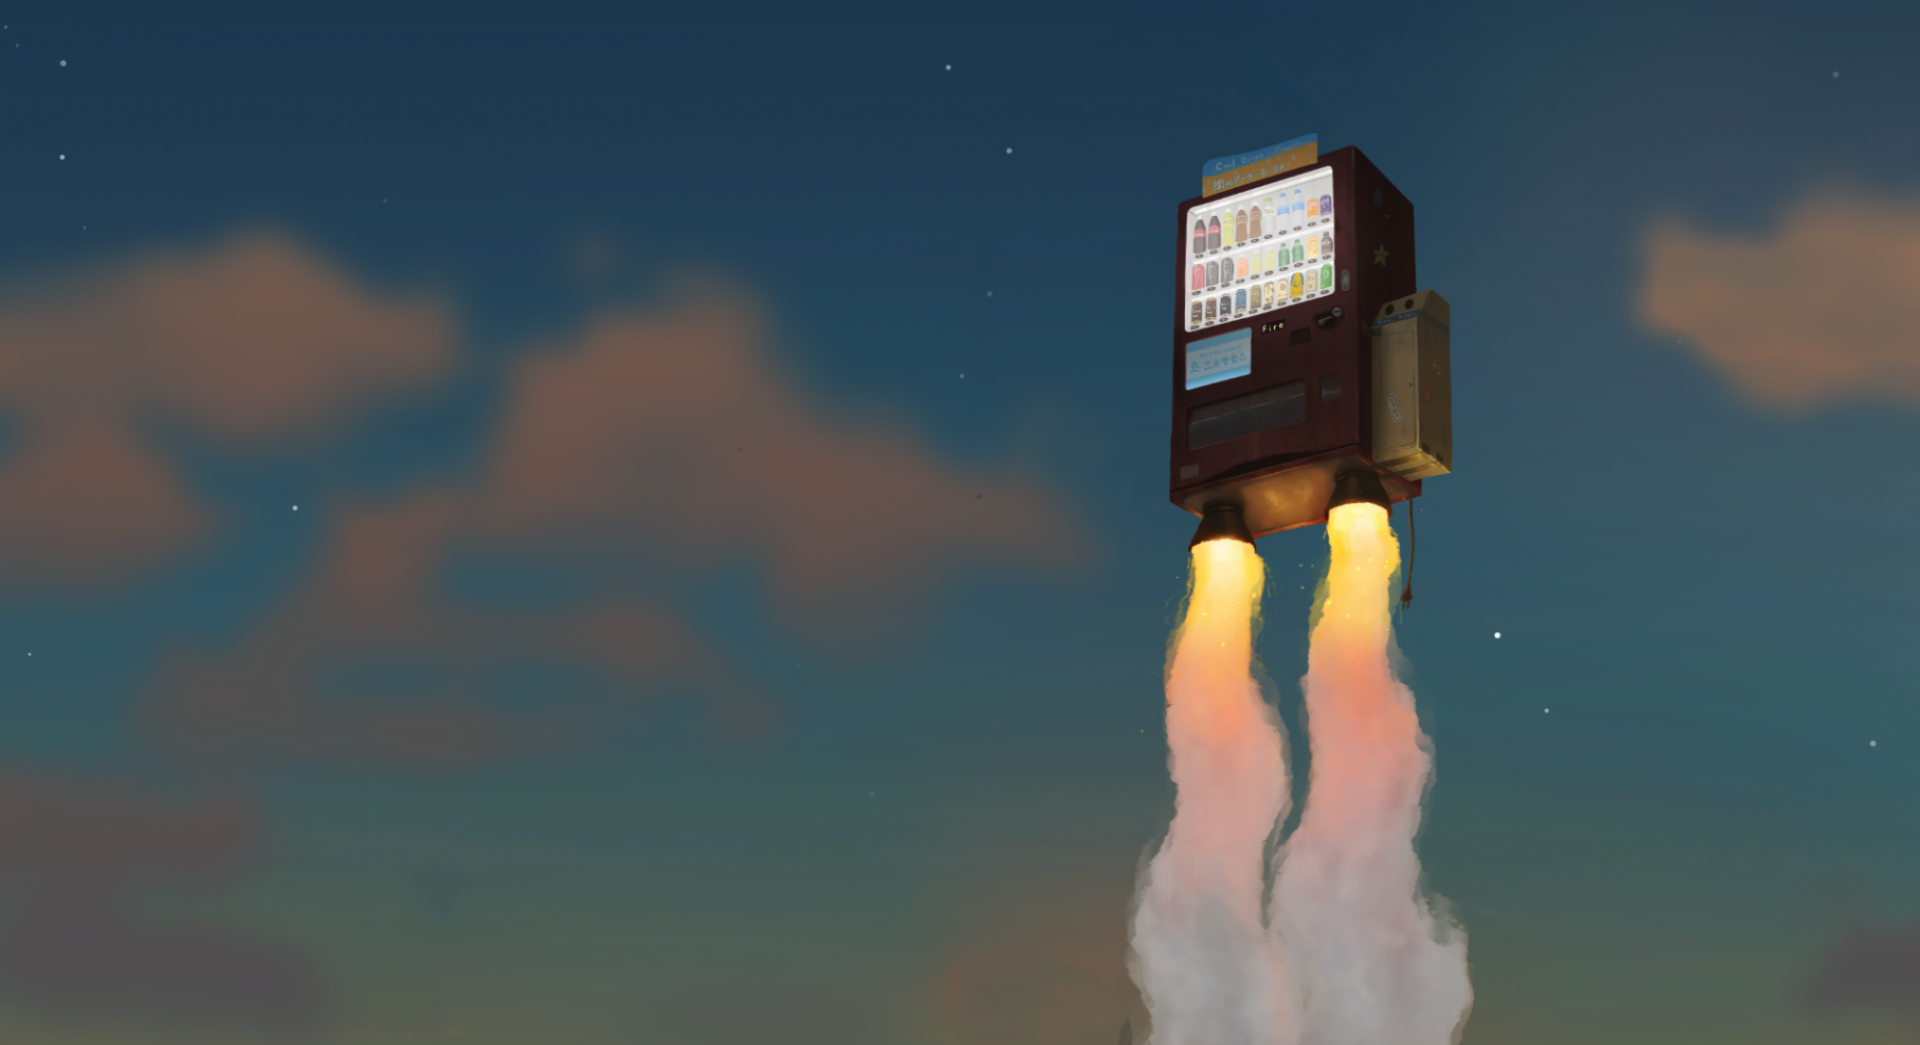 the vending machine flies up into the sky in 4K live wallpaper [DOWNLOAD FREE]